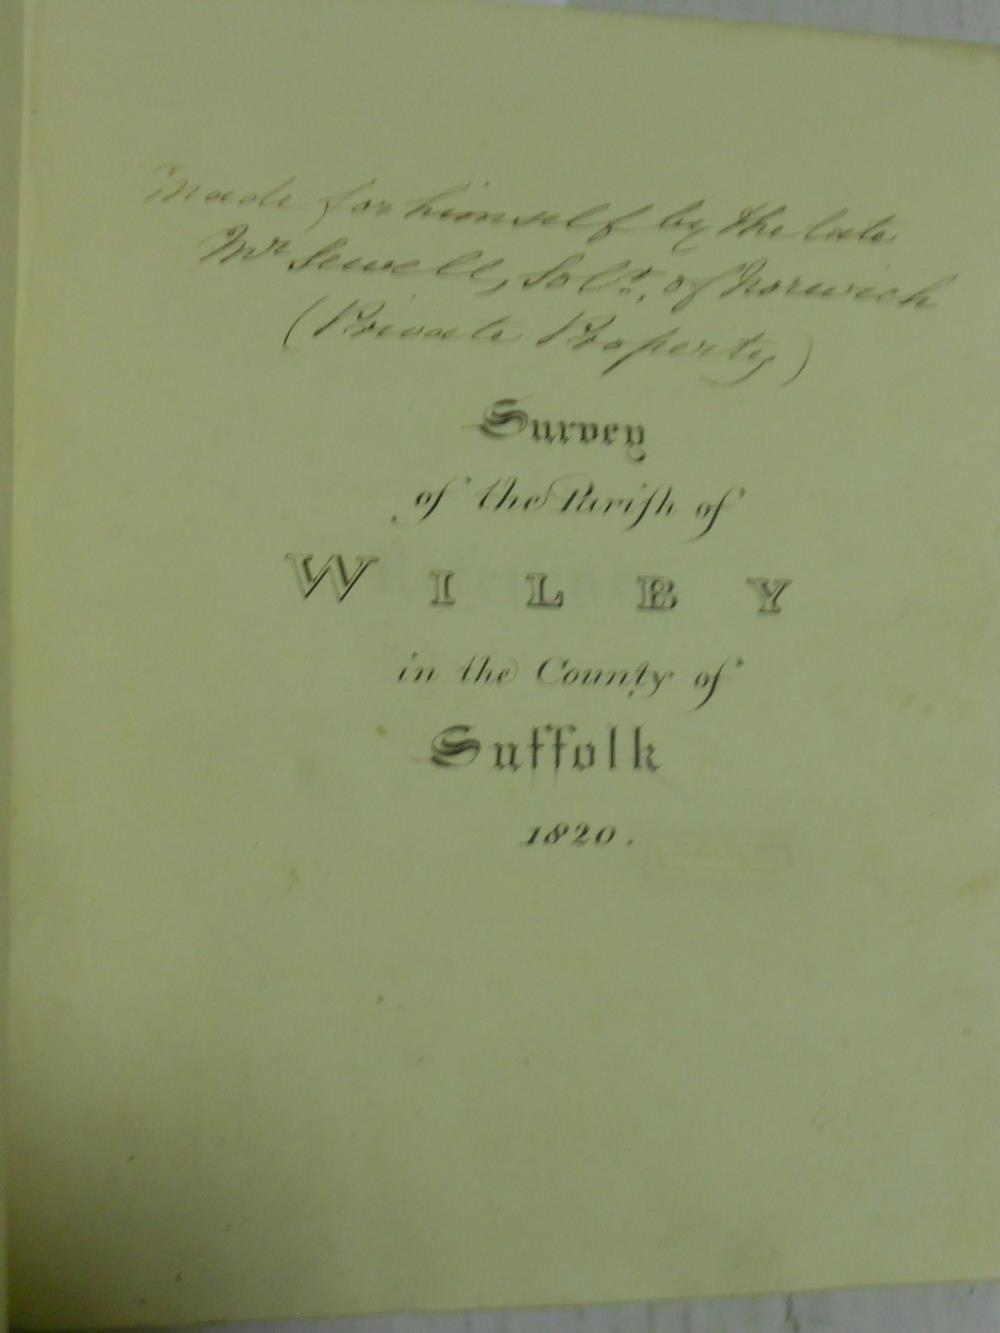 Wilby, Suffolk. SEWELL (Mr.) Survey of the Parish of Wilby in the County of Suffolk, c.1820-30, - Image 3 of 5